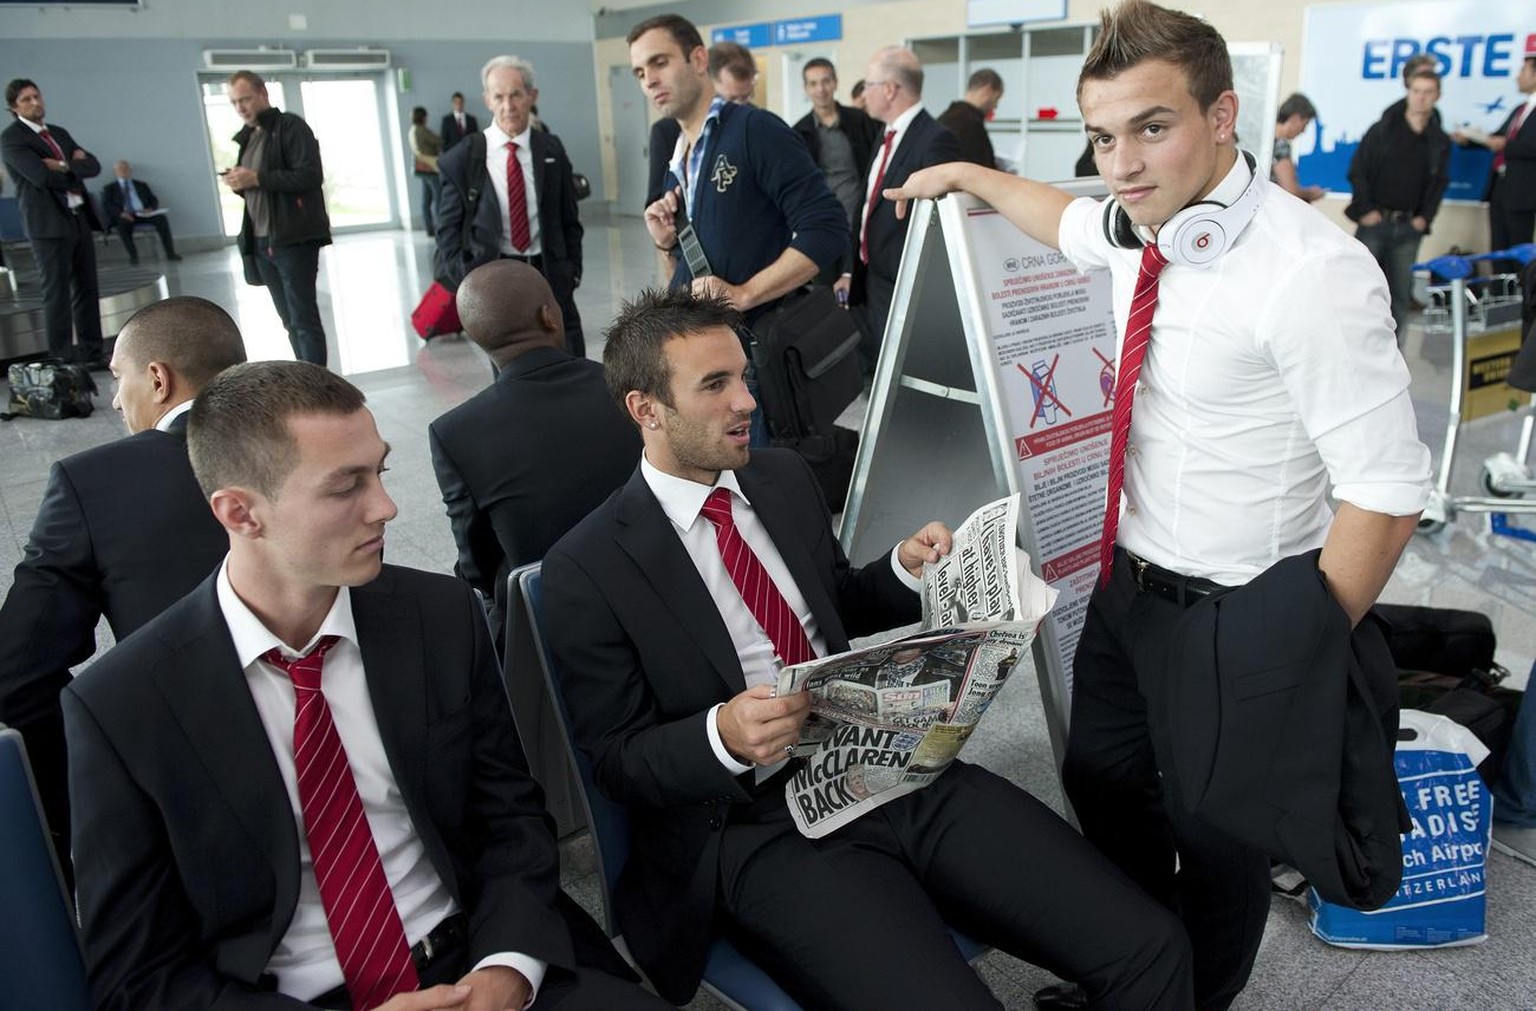 From left: Swiss national soccer team players Francois Affolter, Scott Sutter and Xherdan Shaqiri wait for their luggage at the airport in Podgorica, Montenegro, Wednesday, October 6, 2010. Switzerlan ...